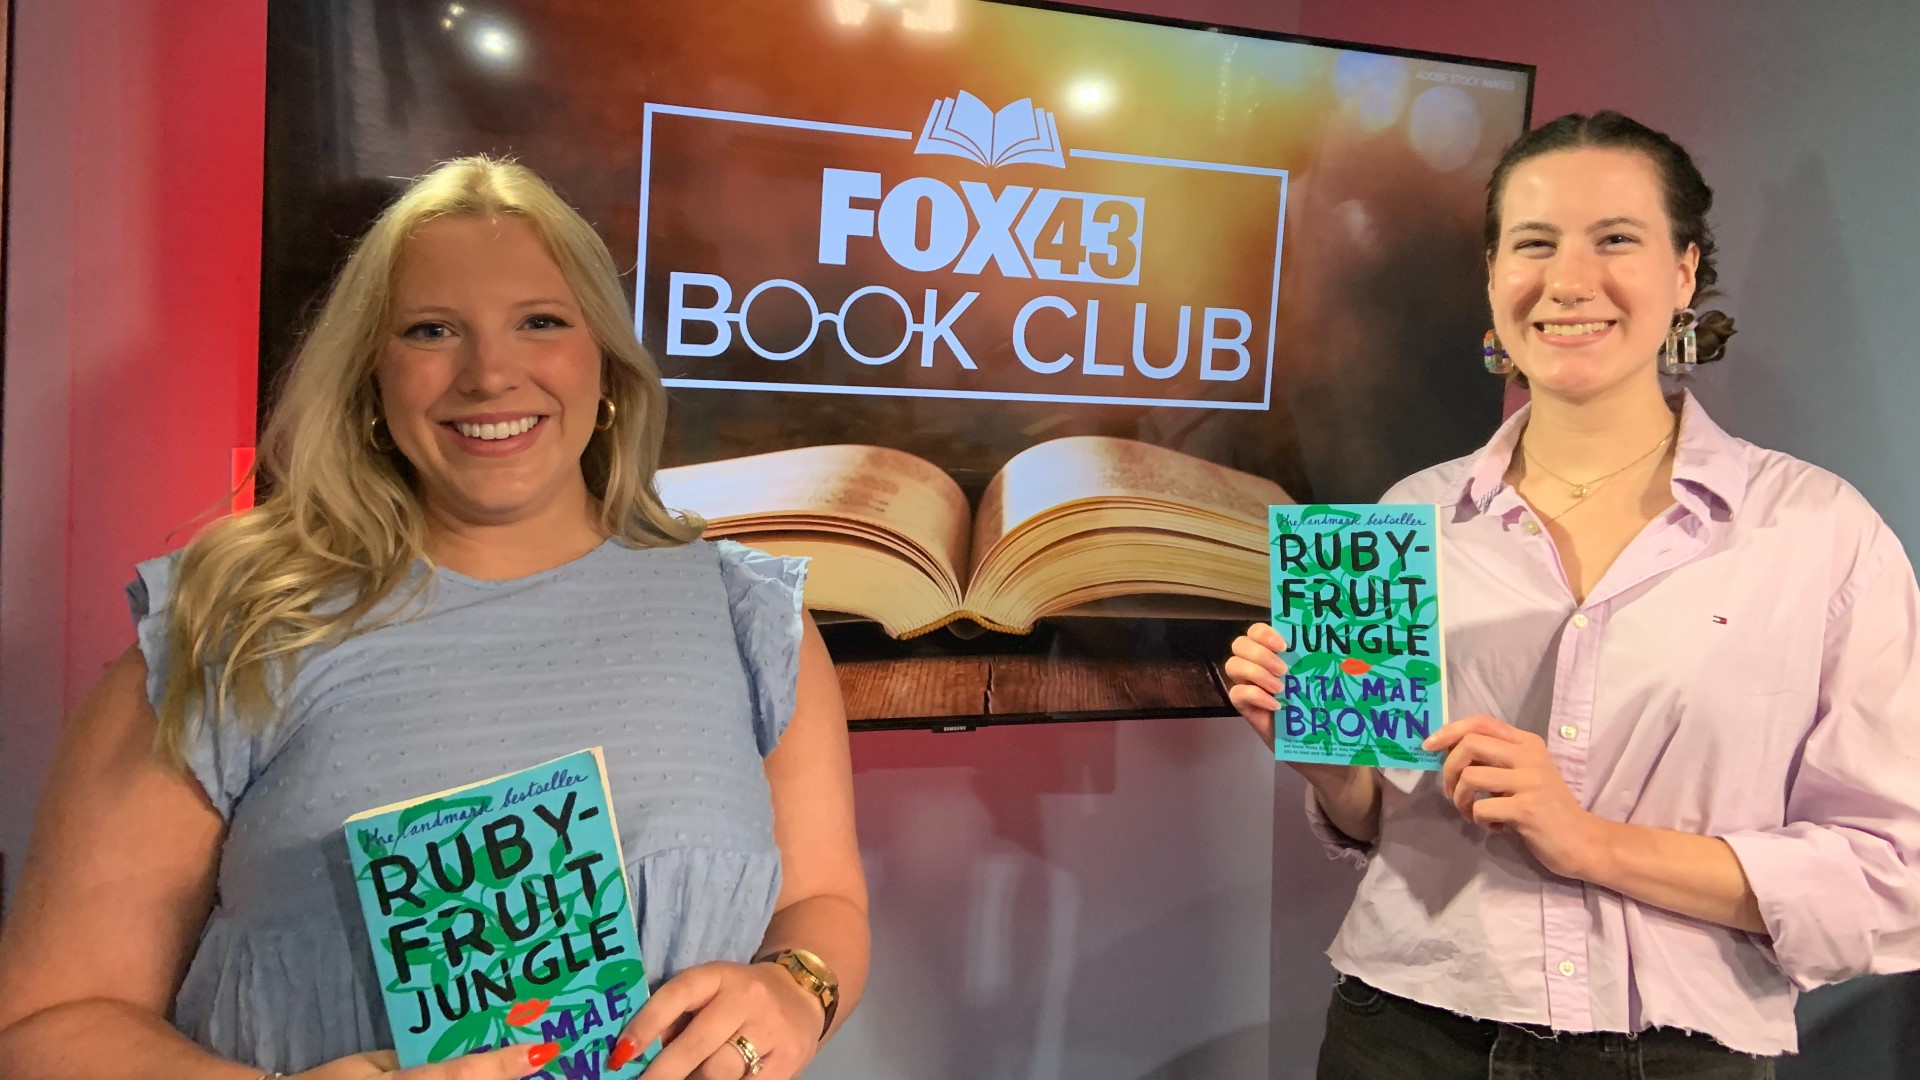 Meteorologist Ally Debicki and digital content producer Kayleigh Johnson discuss July's Book Club pick, "Rubyfruit Jungle" by Rita Mae Brown.